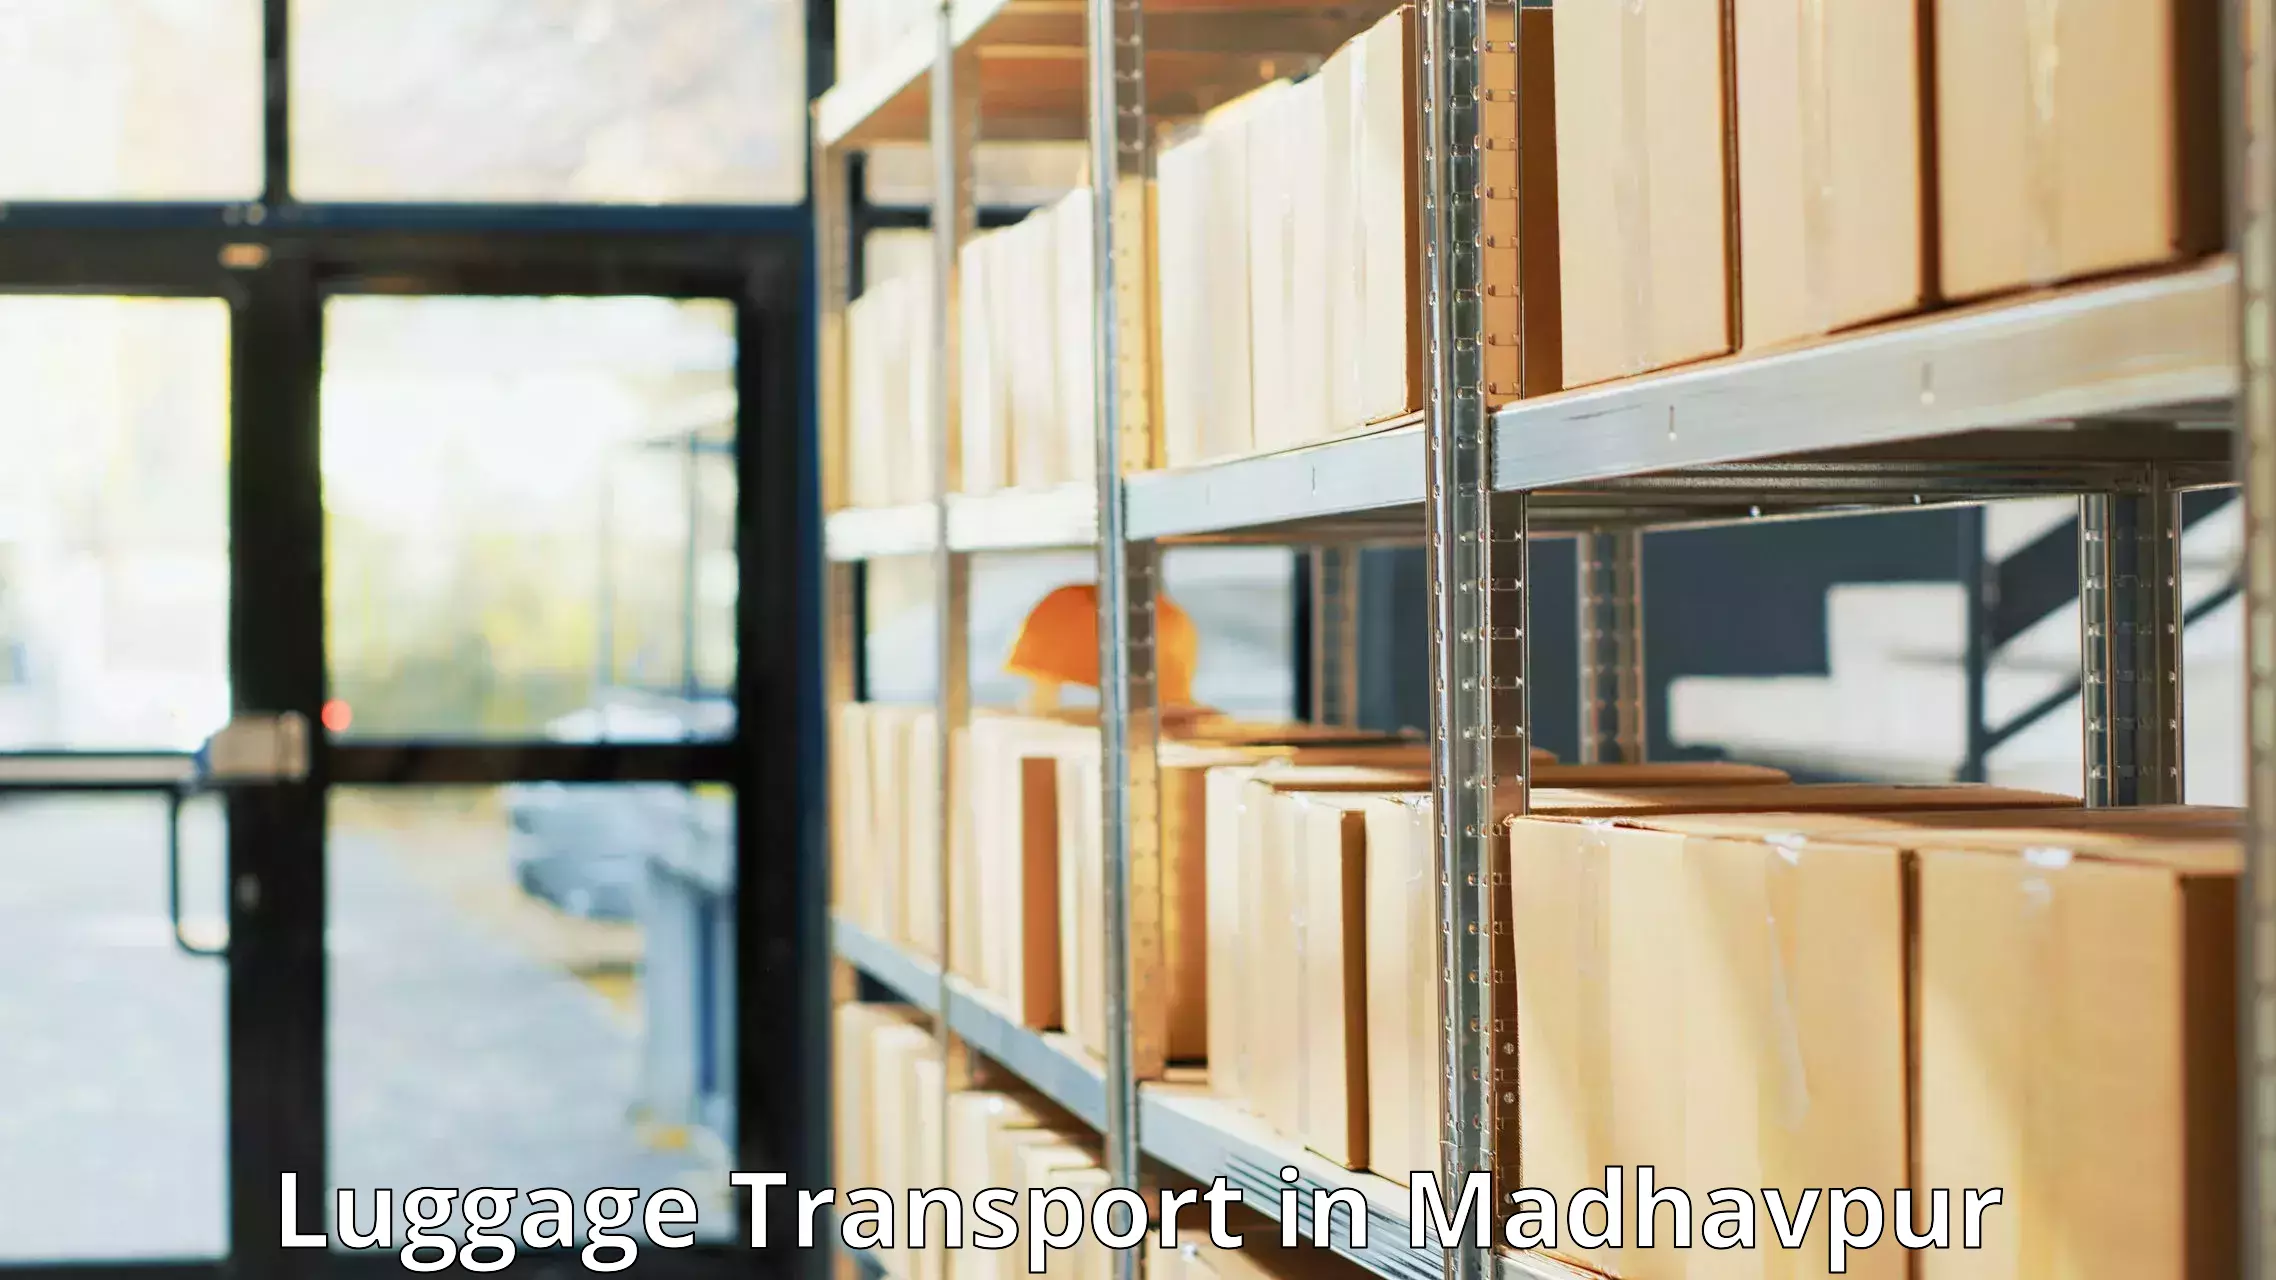 Luggage shipping specialists in Madhavpur